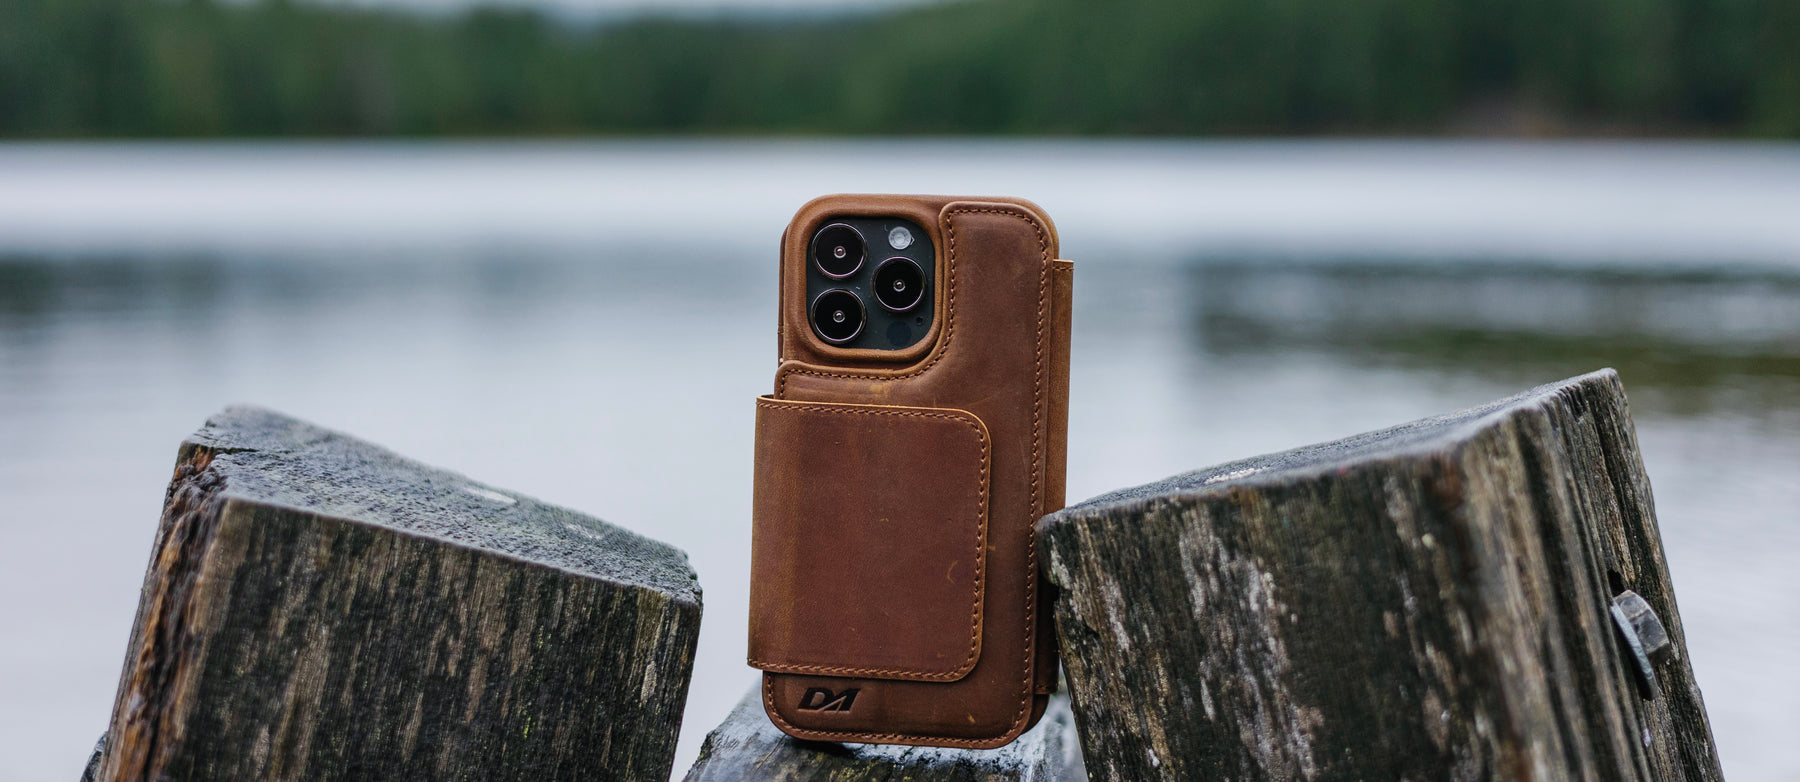 Leather iPhone Wallet Cases & Accessories